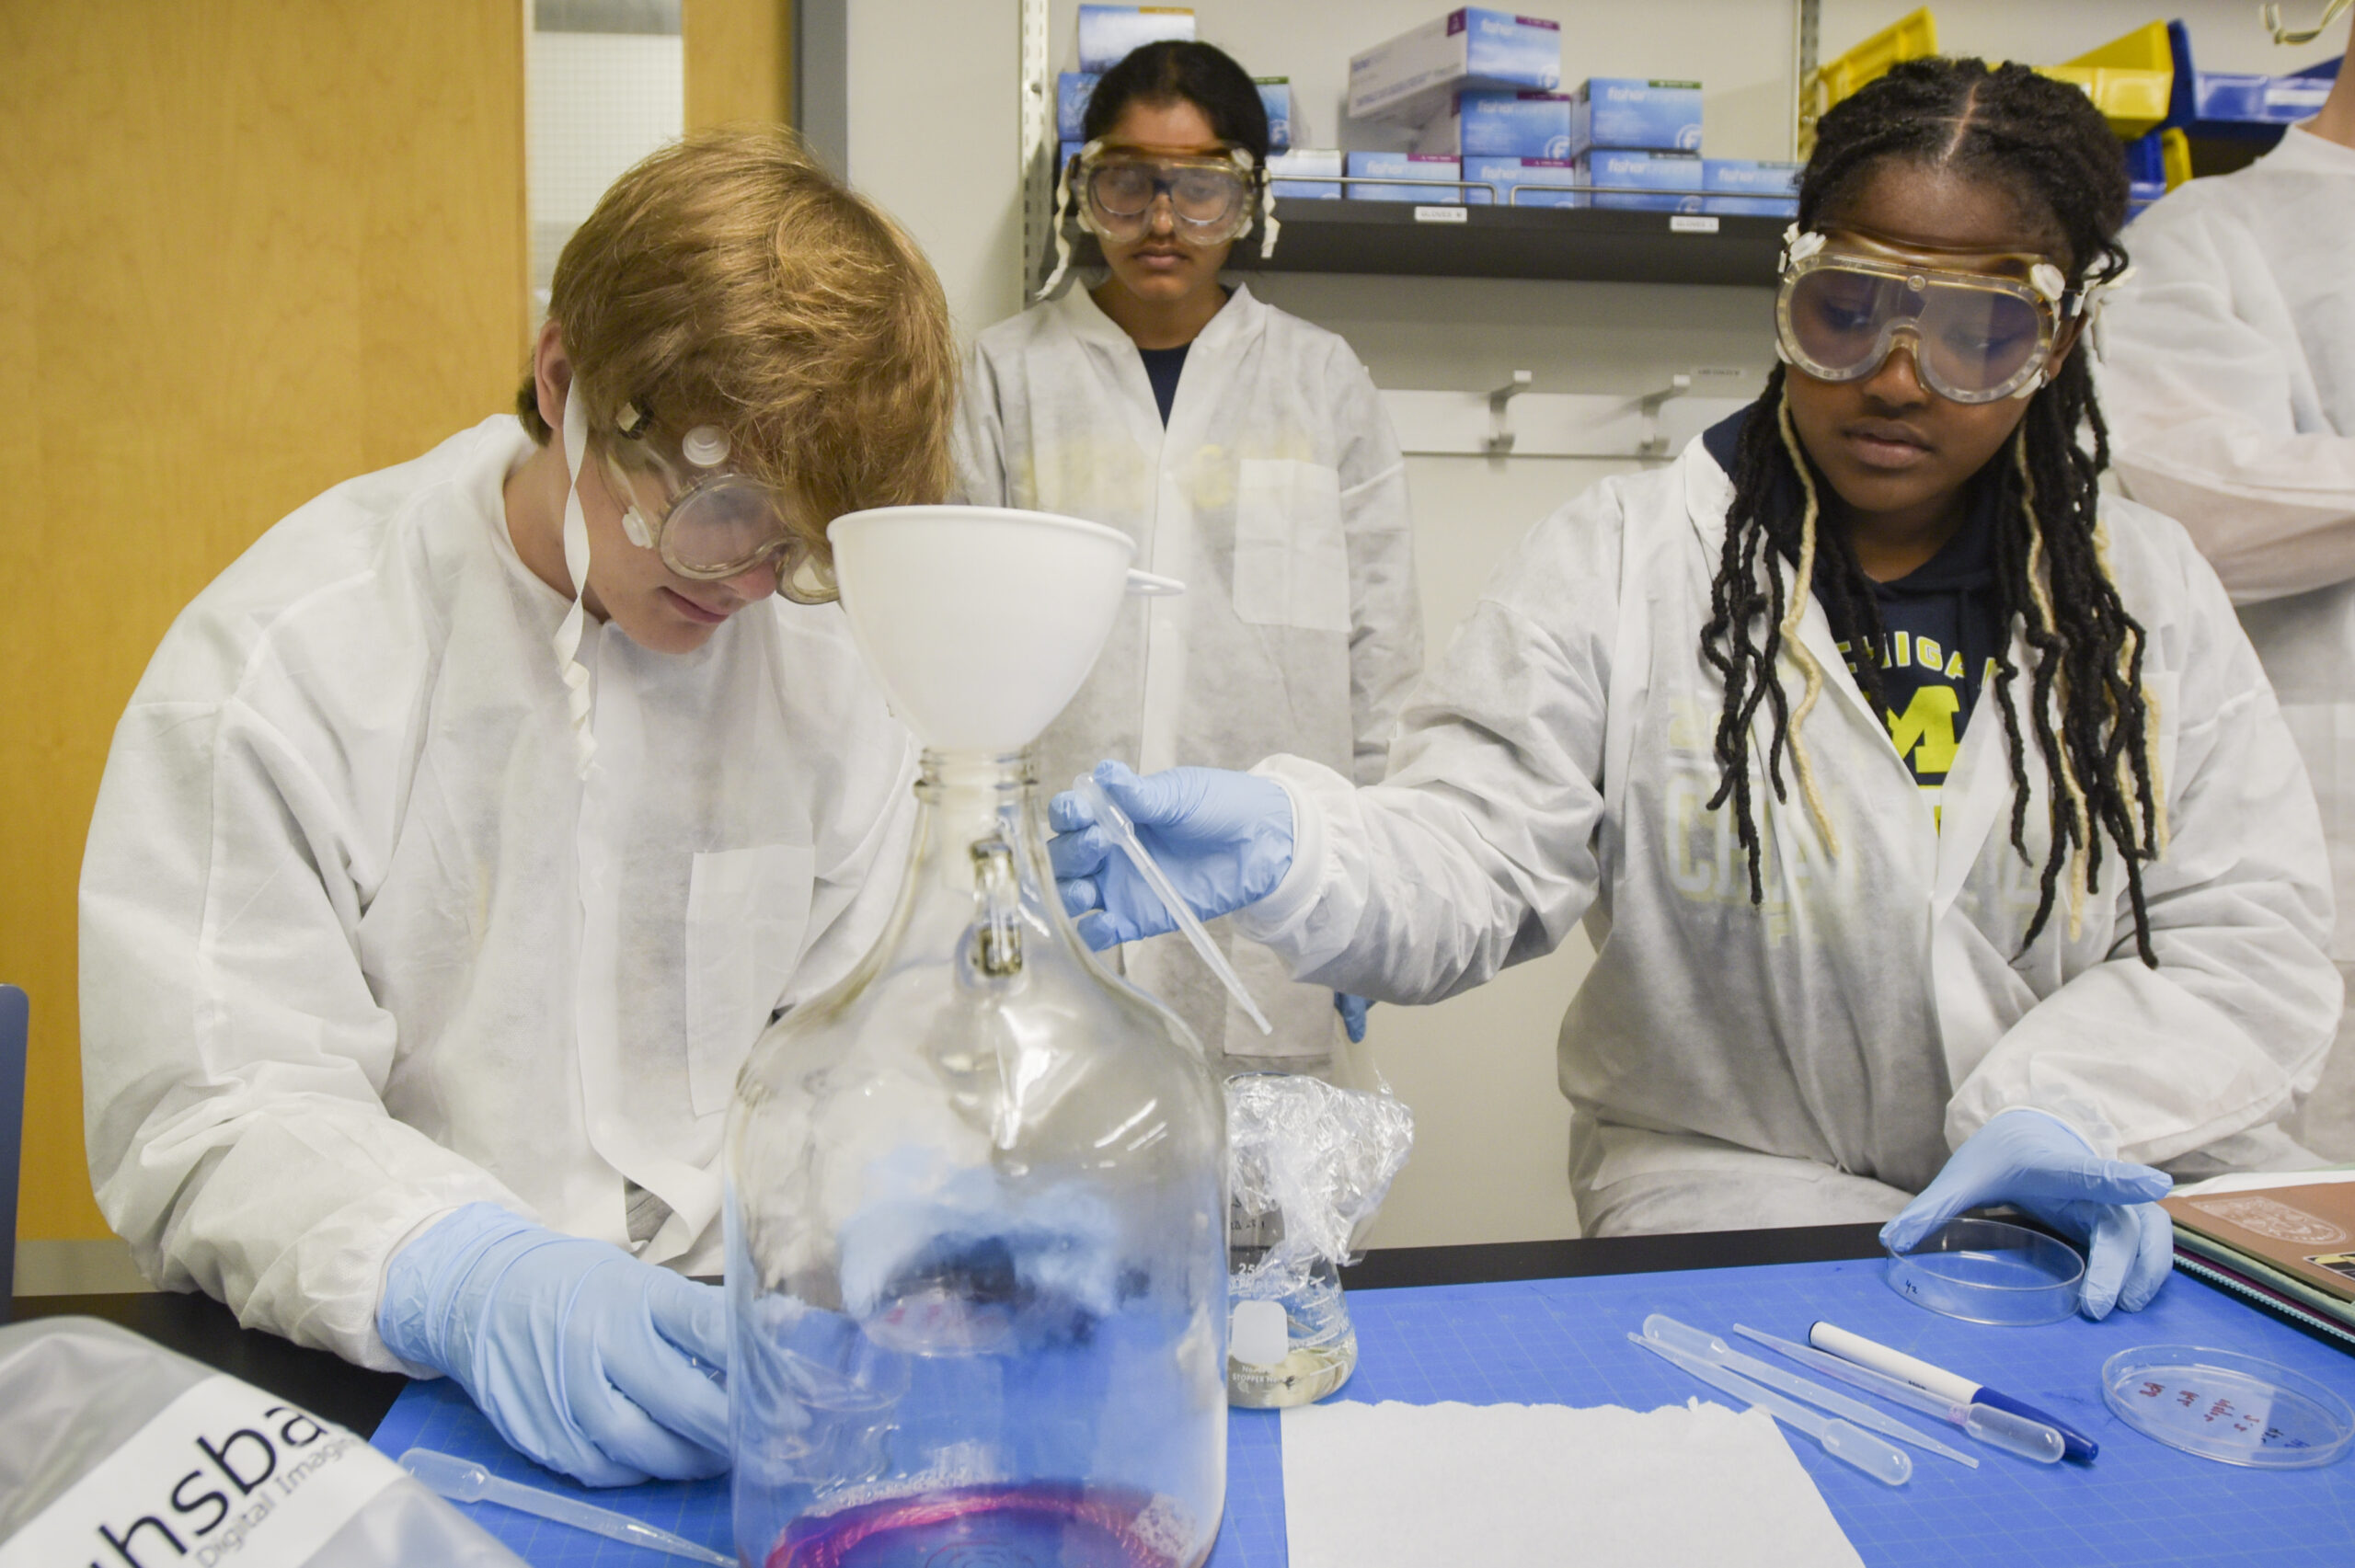 Students in lab attire side by side removing liquid from petri dish